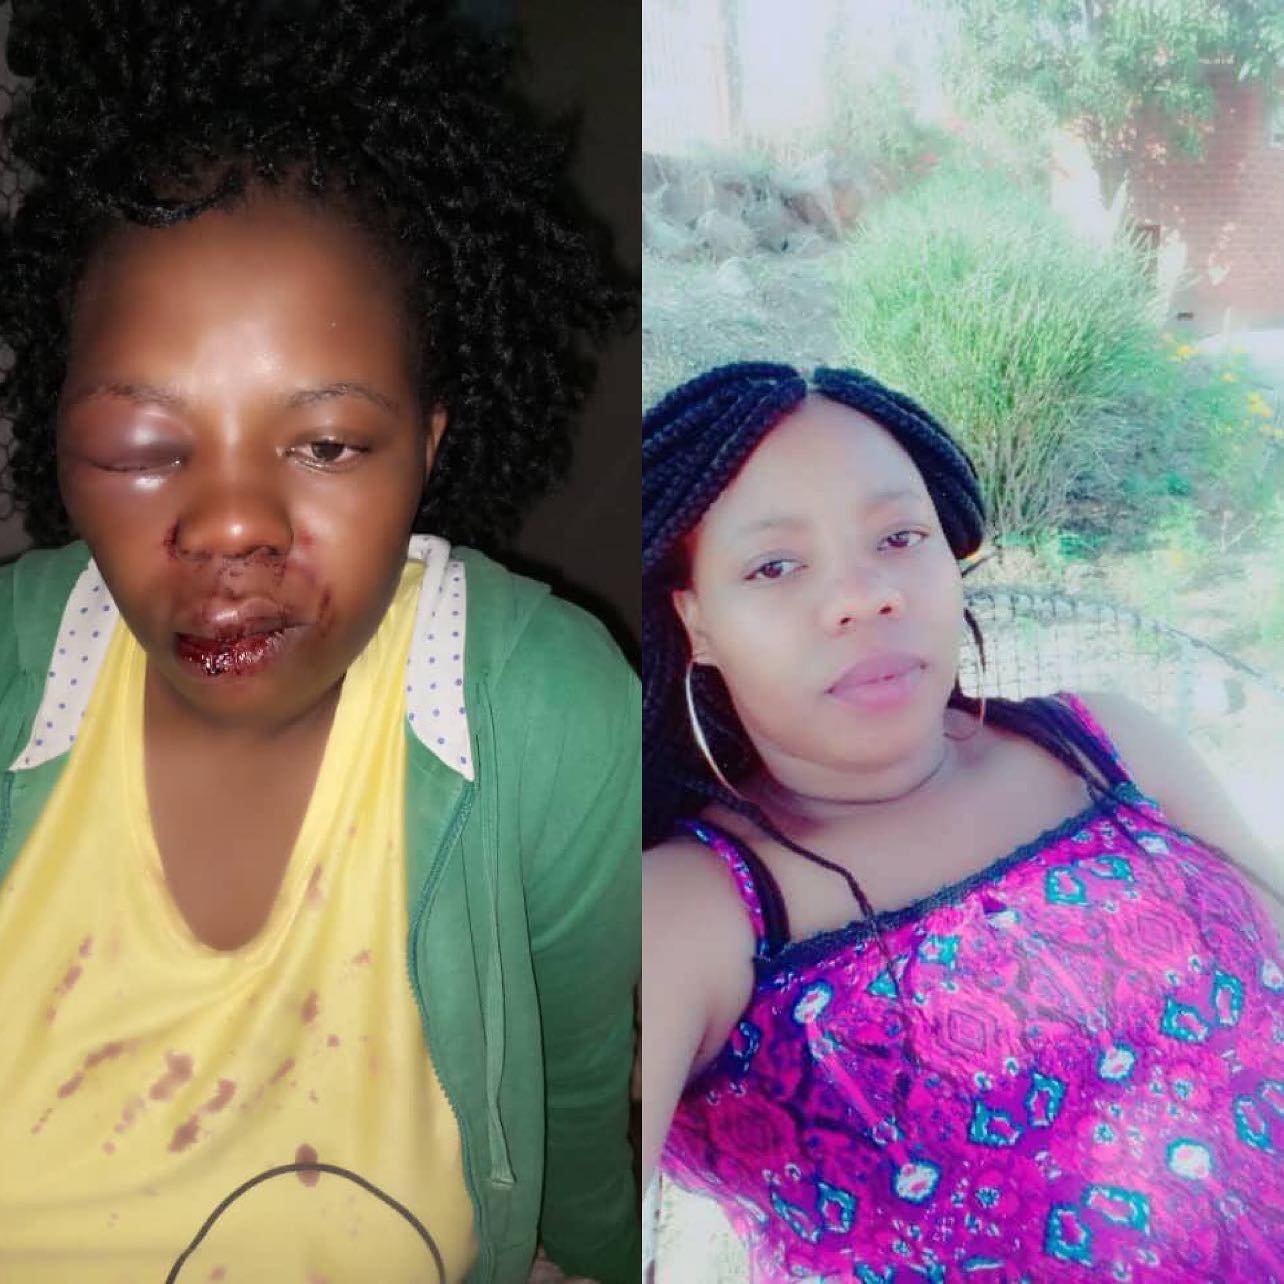 Bindura gold dealer beats up ex-wife for not answering his call, brags that he is untouchable